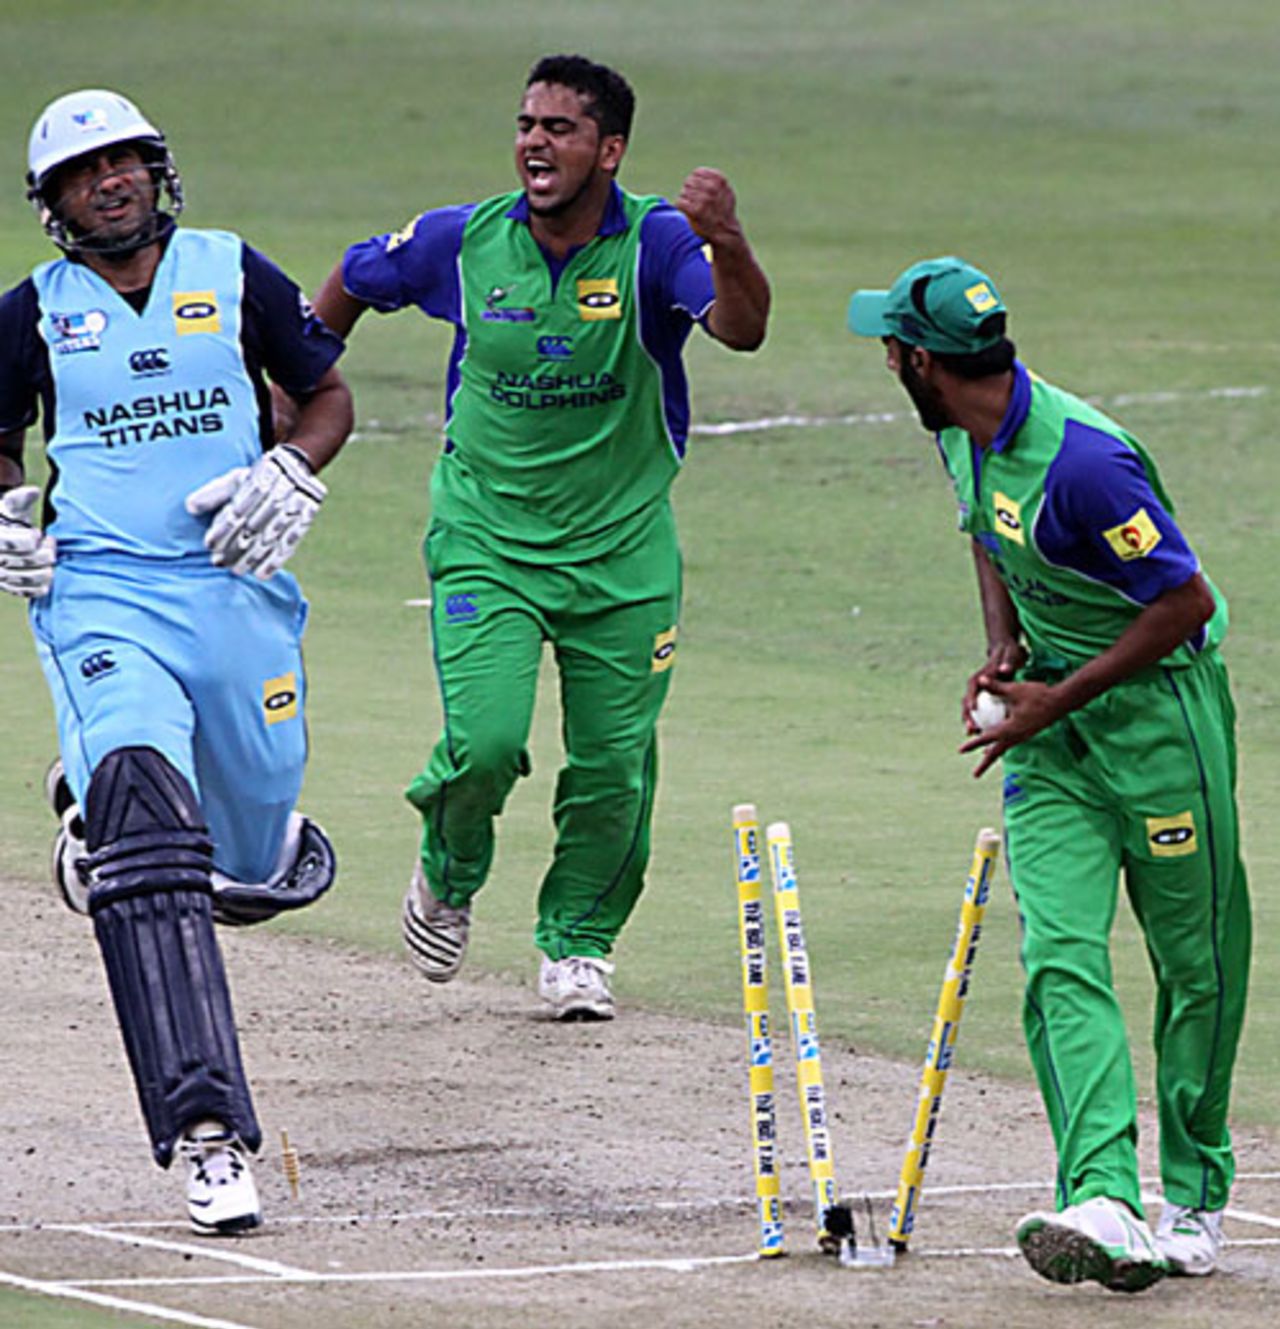 Gulam Bodi is run out by Imraan Khan for 13, Dolphins v Titans, Durban, MTN Domestic Championship, January 2, 2009